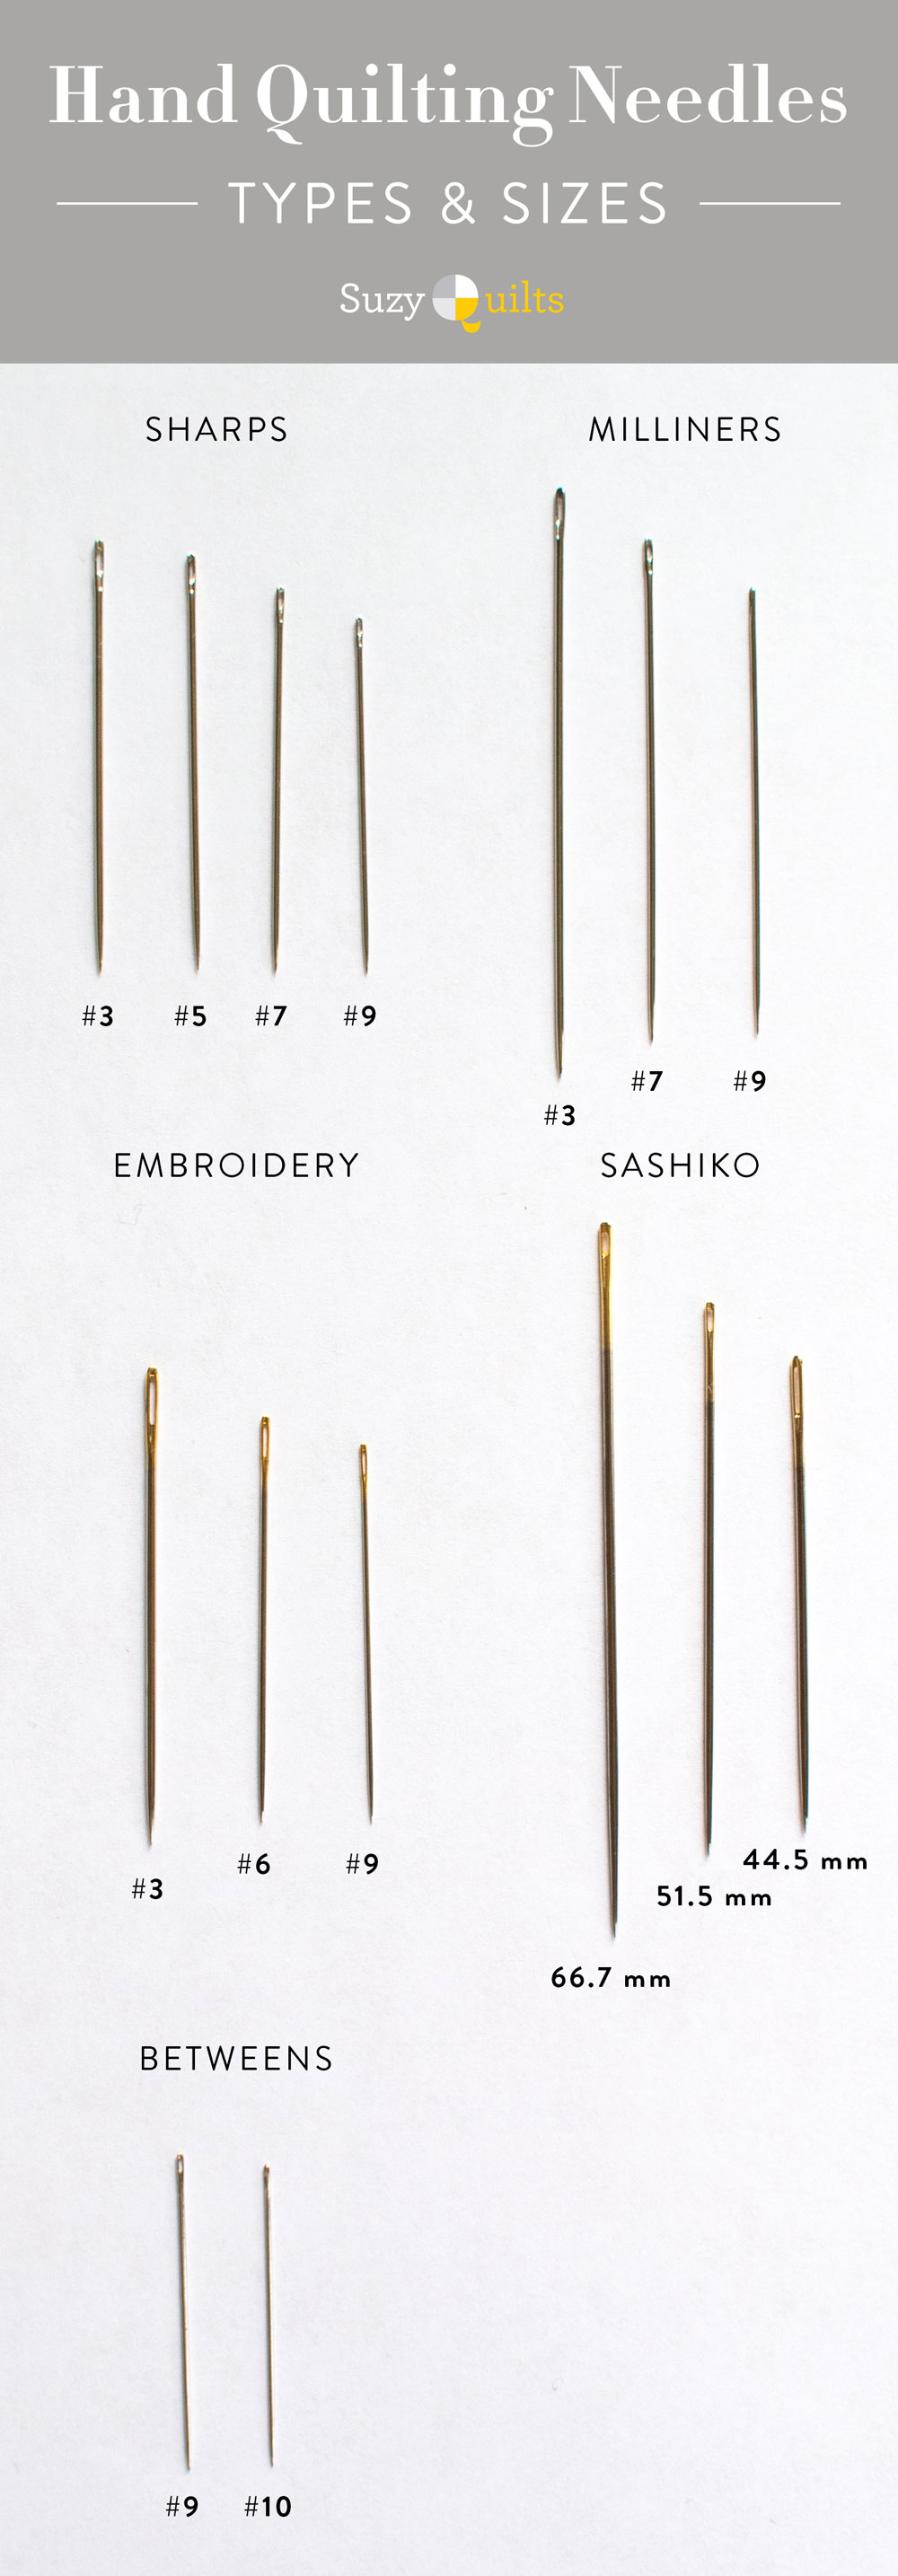 An infographic to help display the different kinds of quilting needles and their sizes. | Suzy Quilts https://suzyquilts.com/best-hand-quilting-needles-part-i